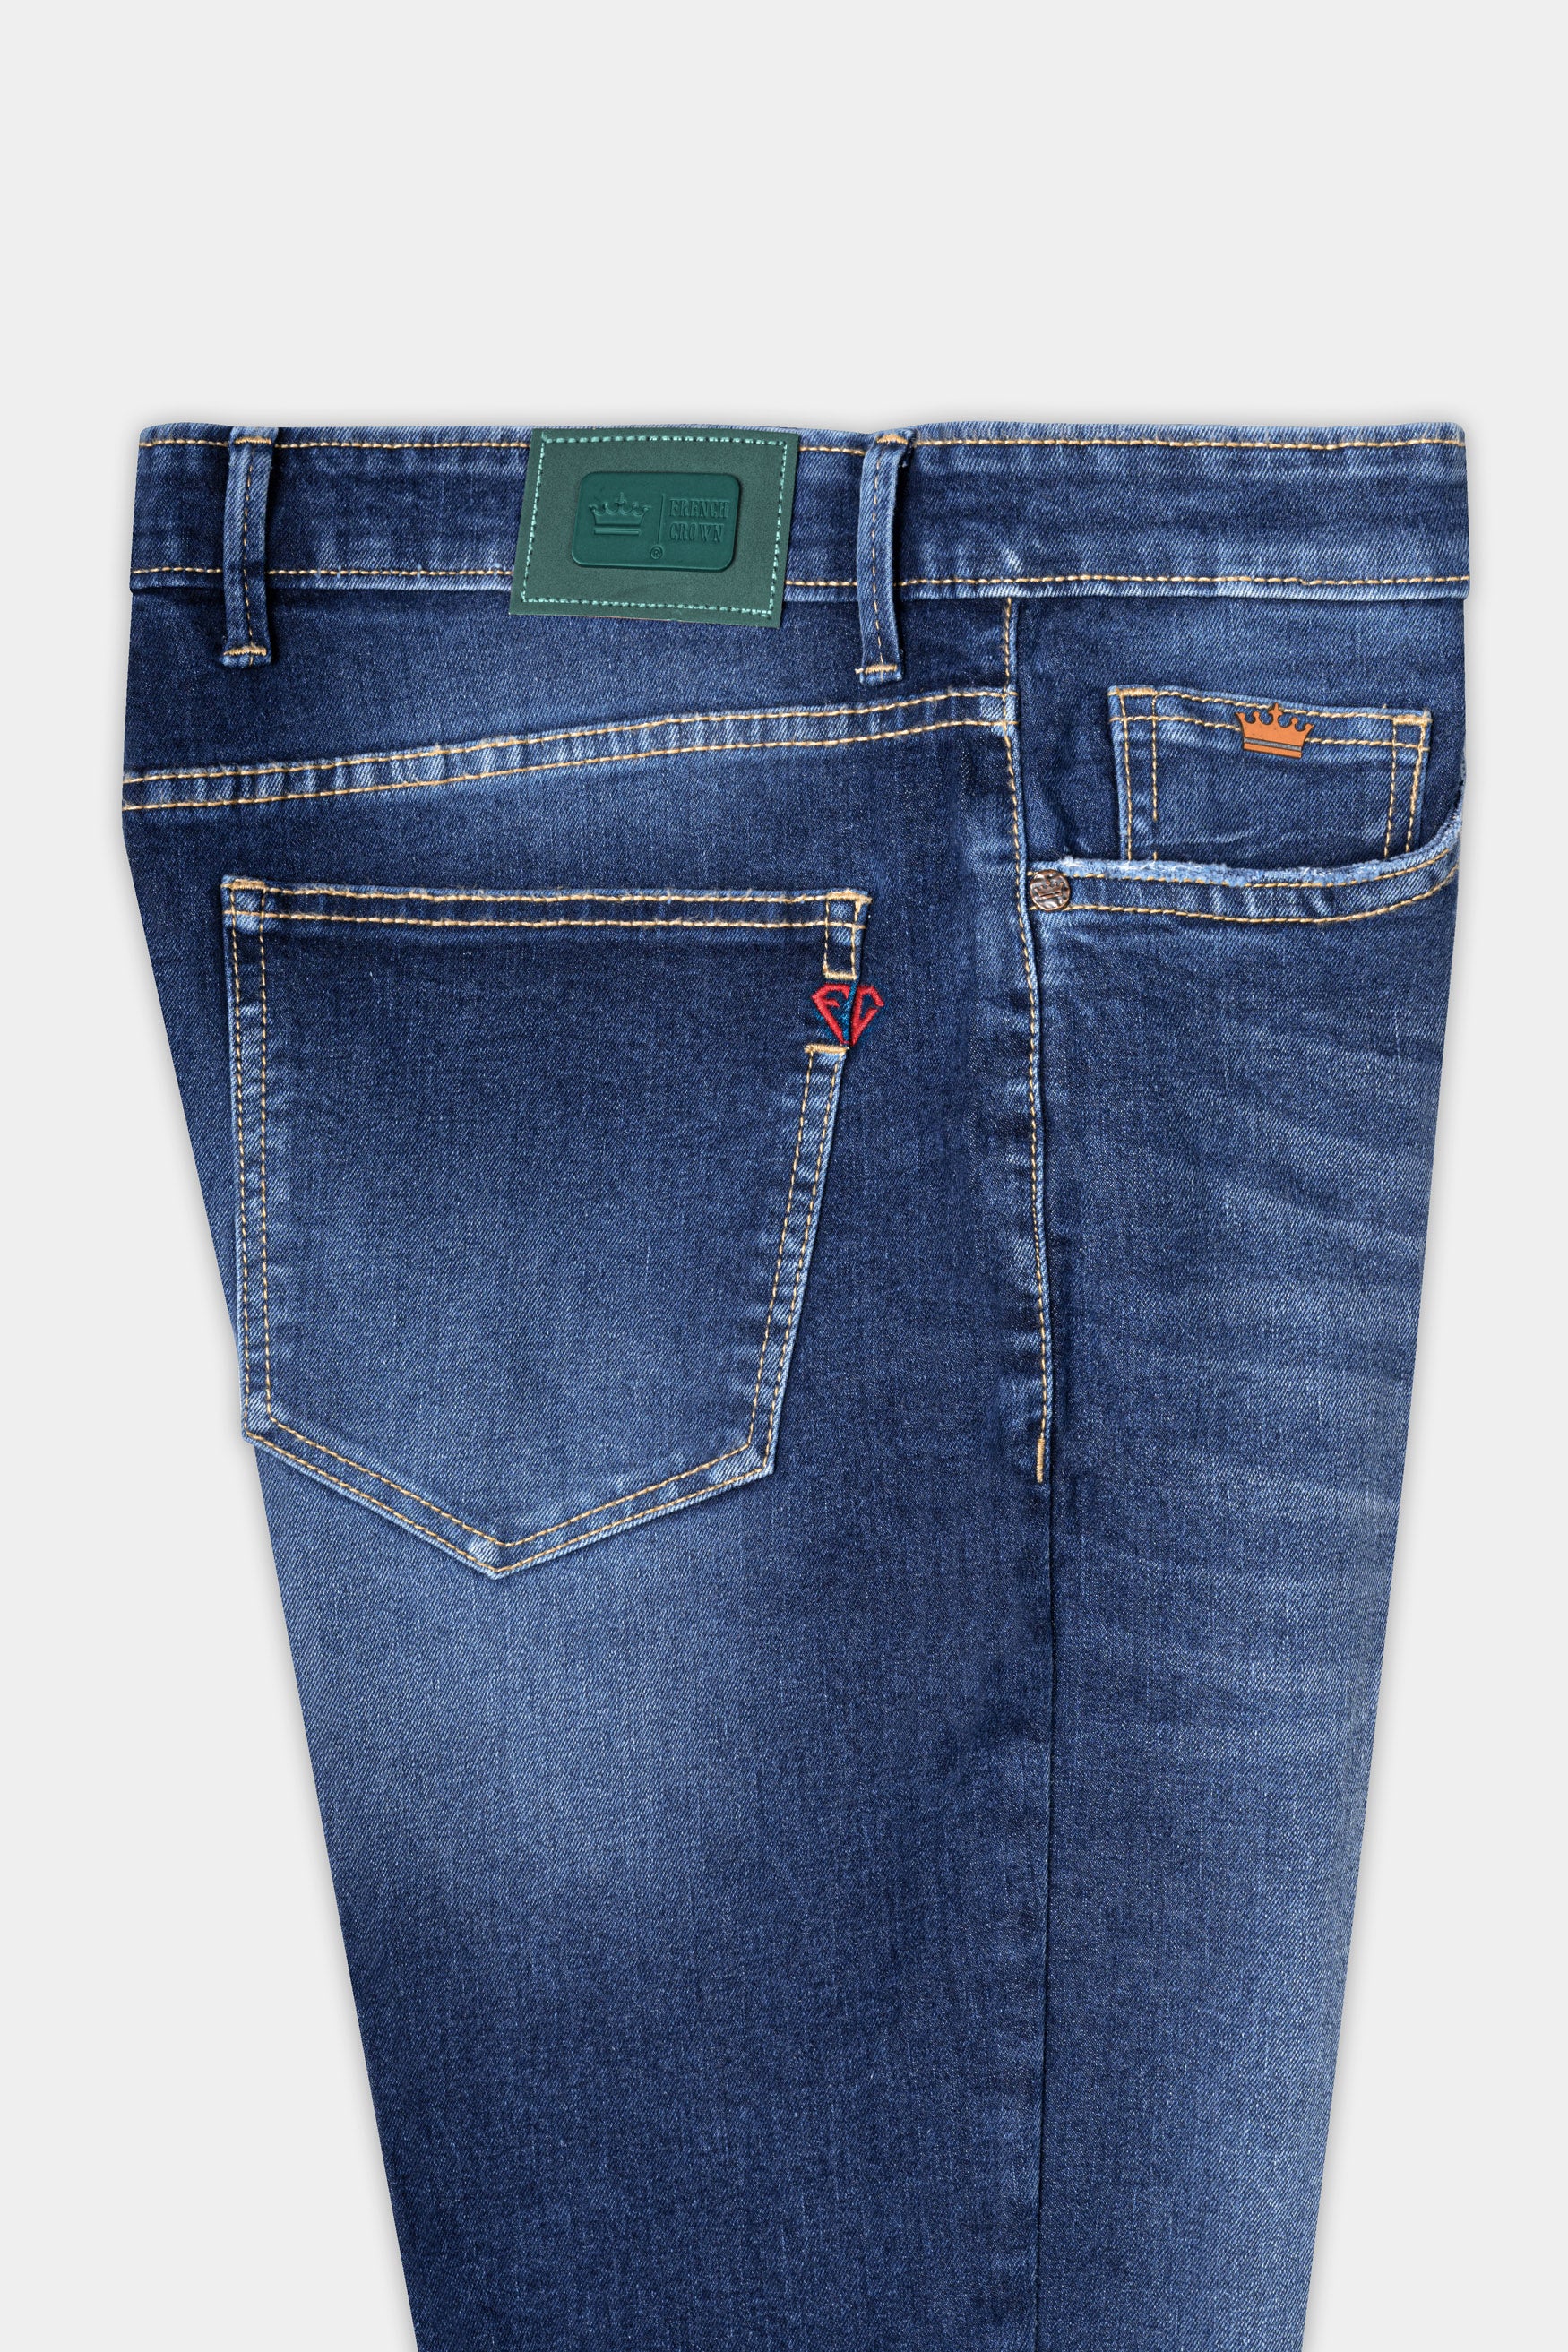 Fiord Blue Whiskering Wash Stretchable Denim